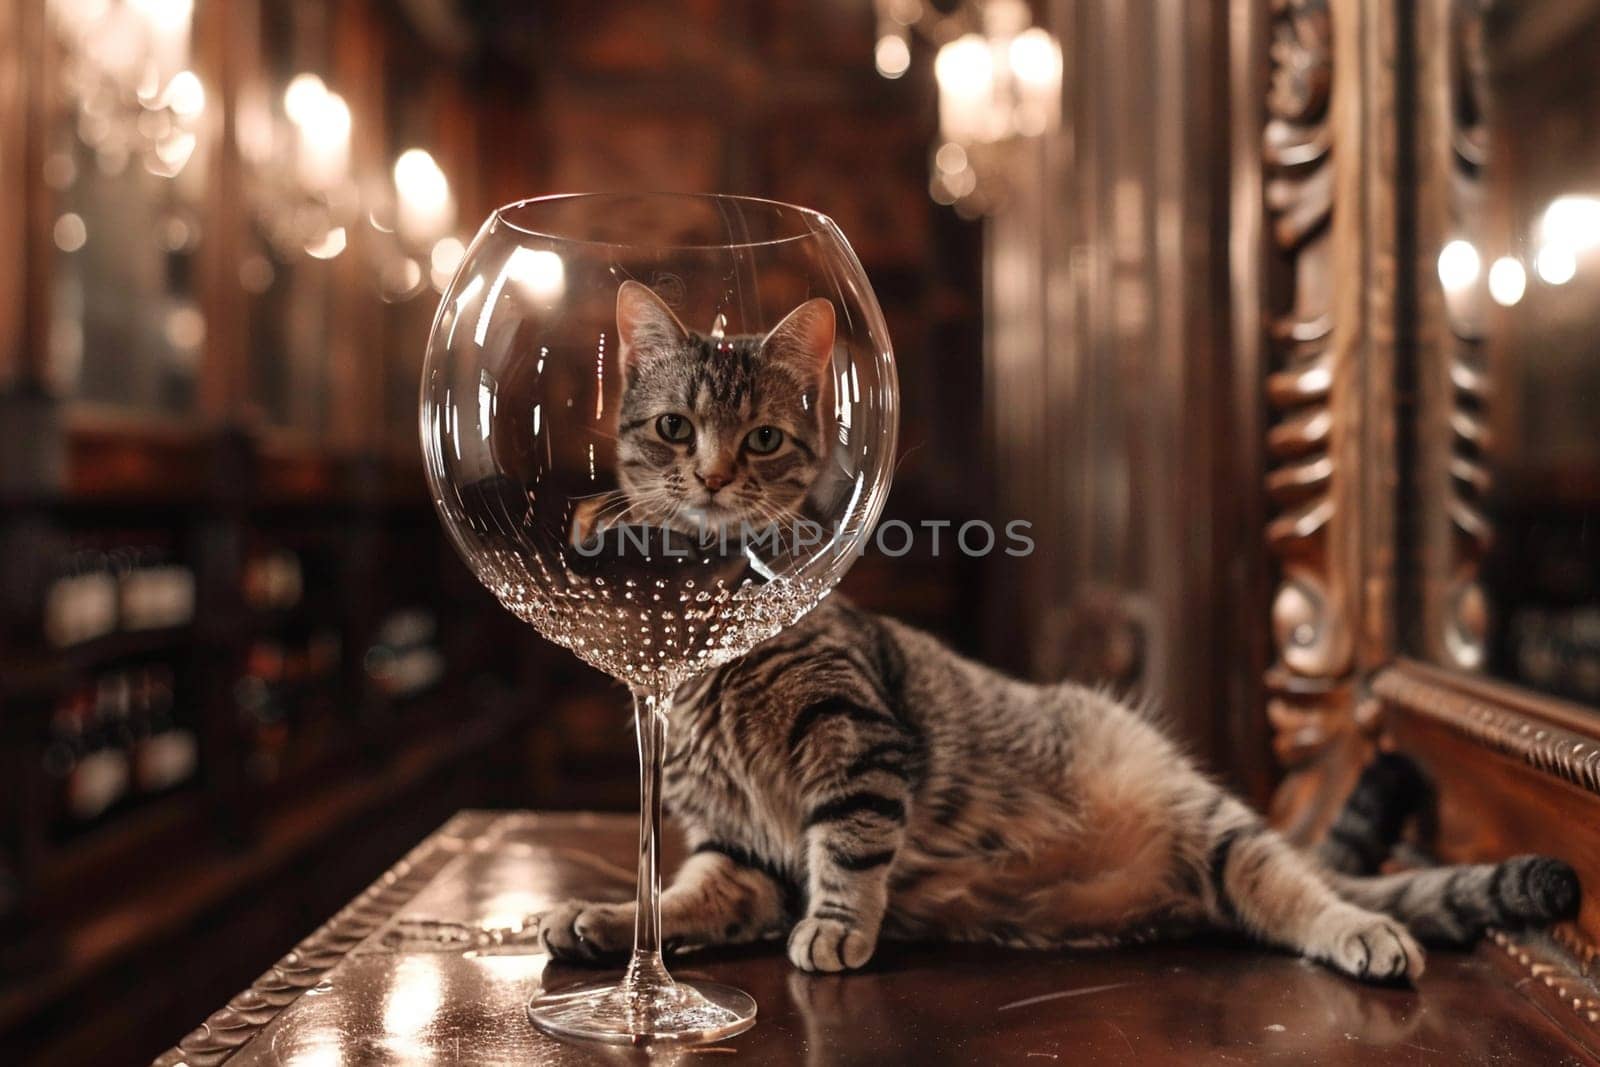 Curious cat lounging bar wine glass. Feline encounter sophisticated setting, pets quirky situations by Yevhen89